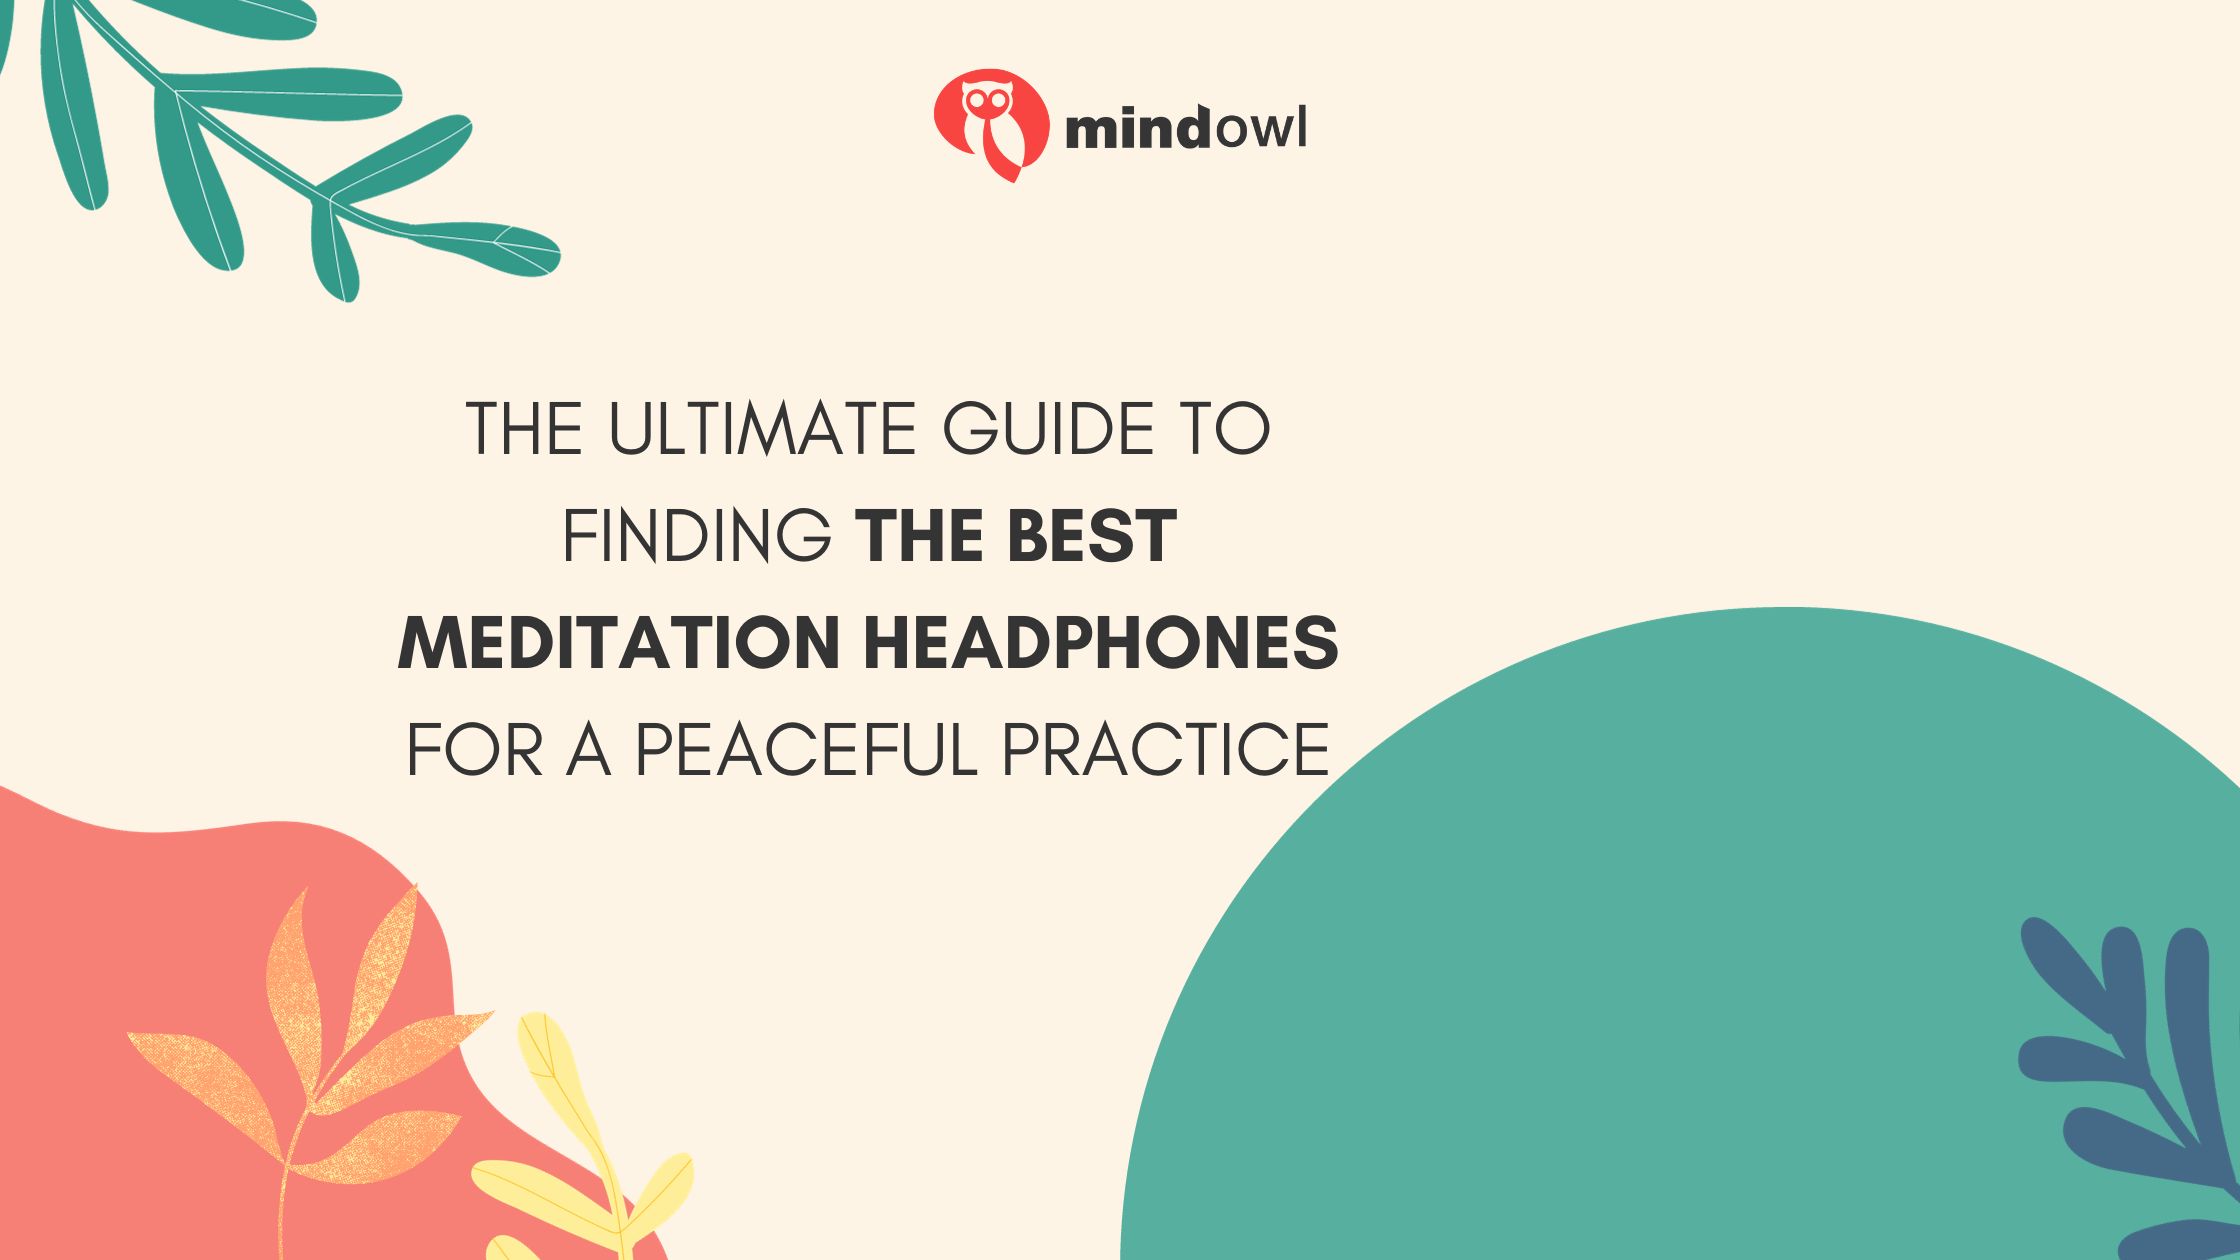 The Ultimate Guide To Finding The Best Meditation Headphones For A Peaceful Practice